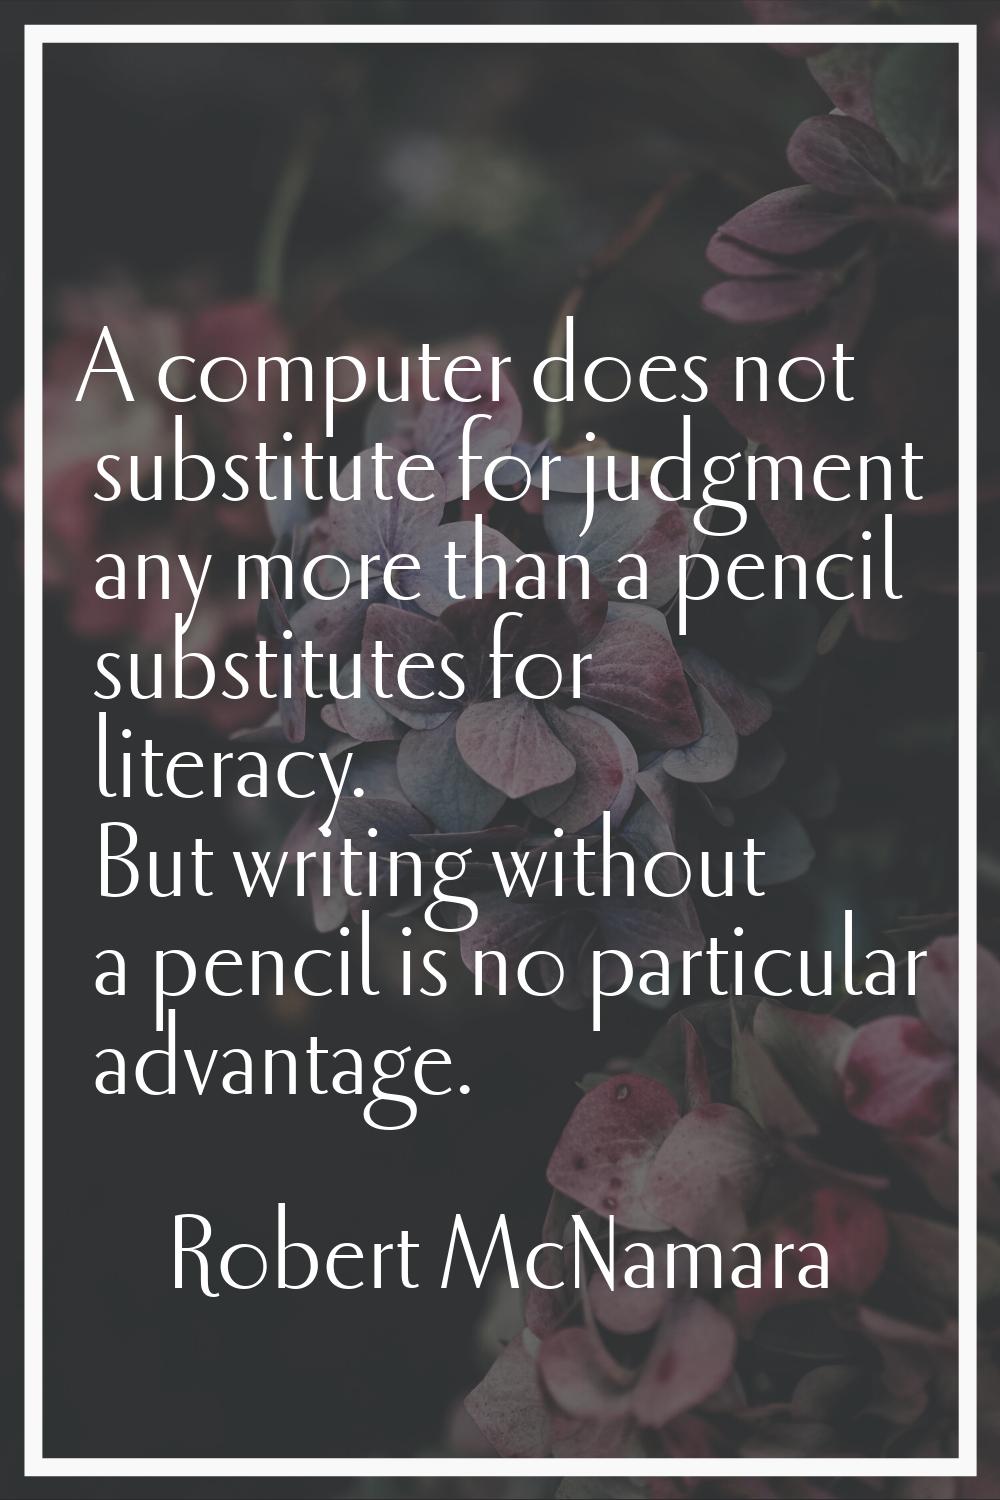 A computer does not substitute for judgment any more than a pencil substitutes for literacy. But wr